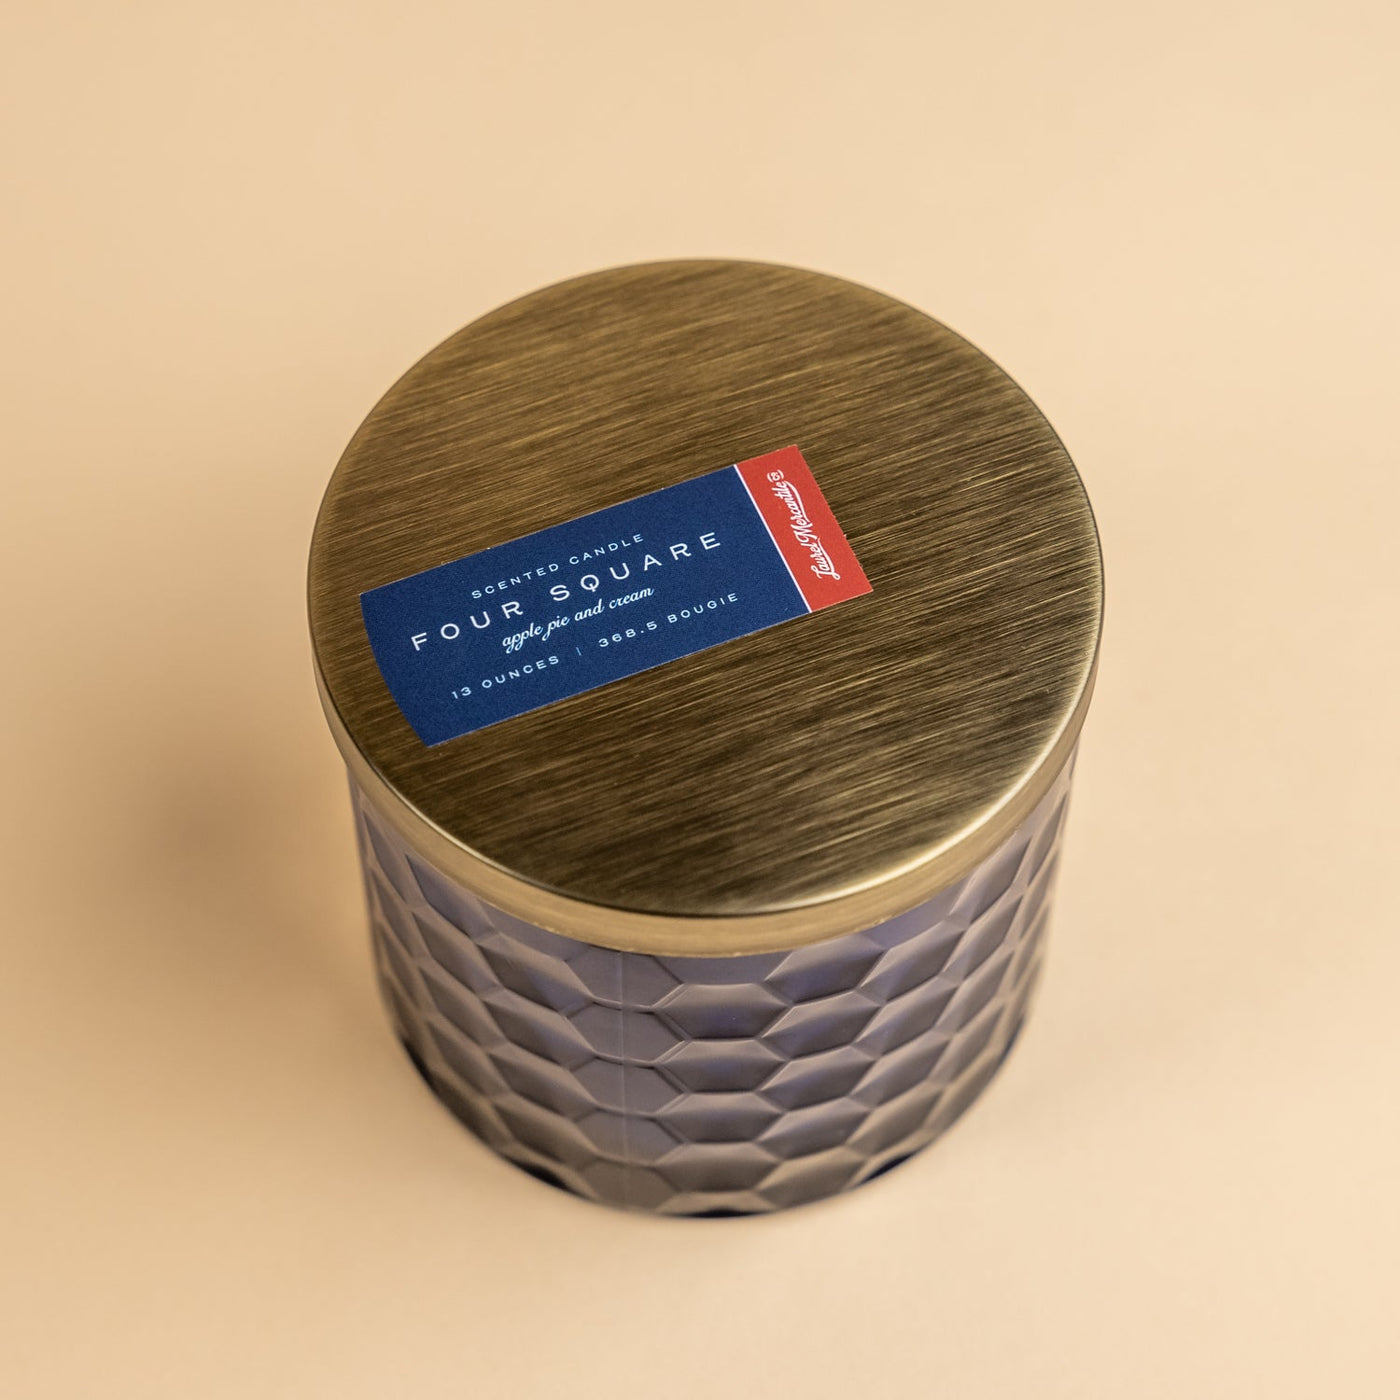 Four Square 13 oz. Candle